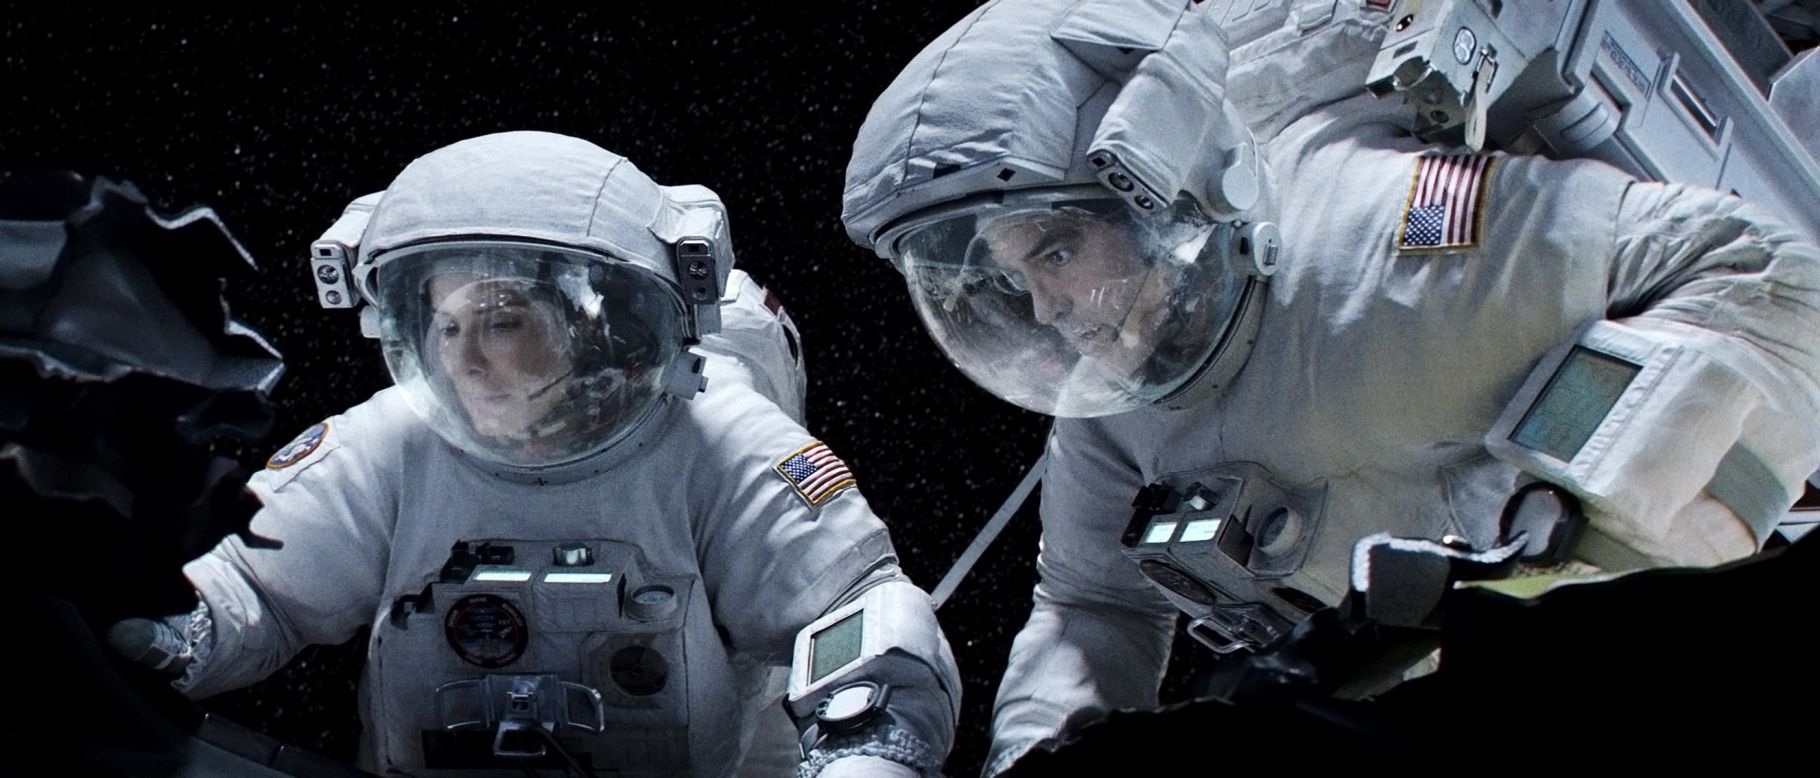 It's the NASA suit worn by George Clooney in the critically-acclaimed 2013 film "Gravity."